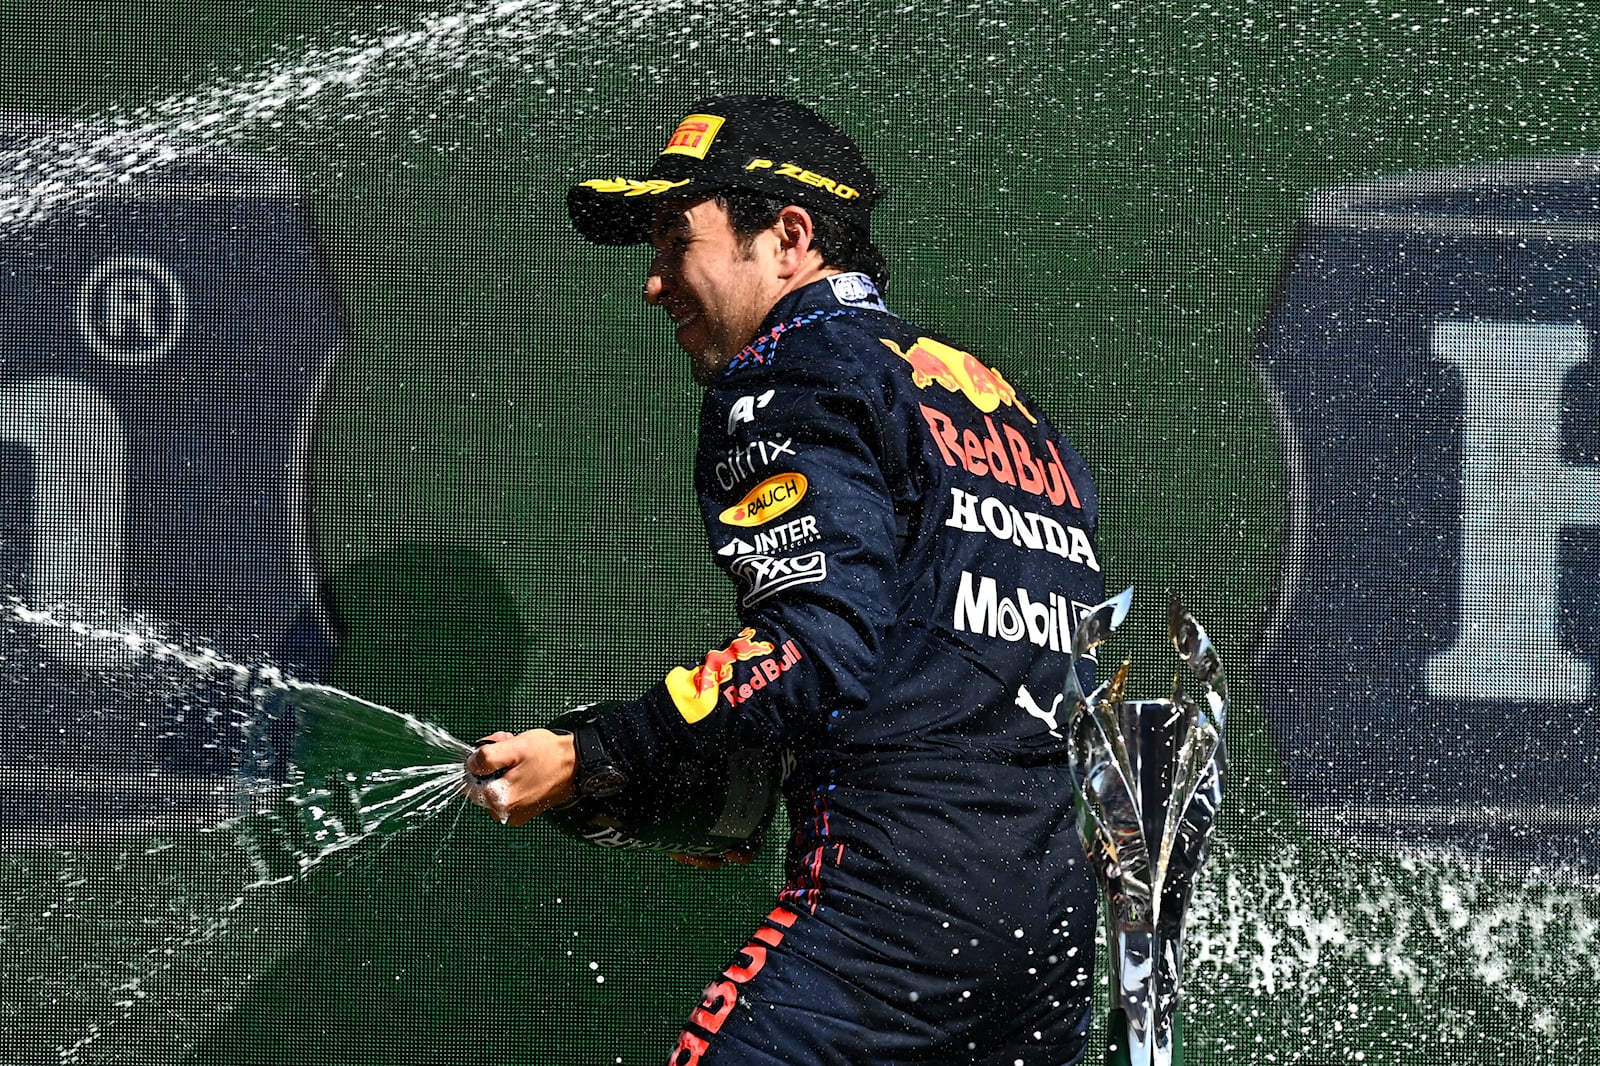 Red Bull On All-Time High After Mexican Grand Prix | CarBuzz